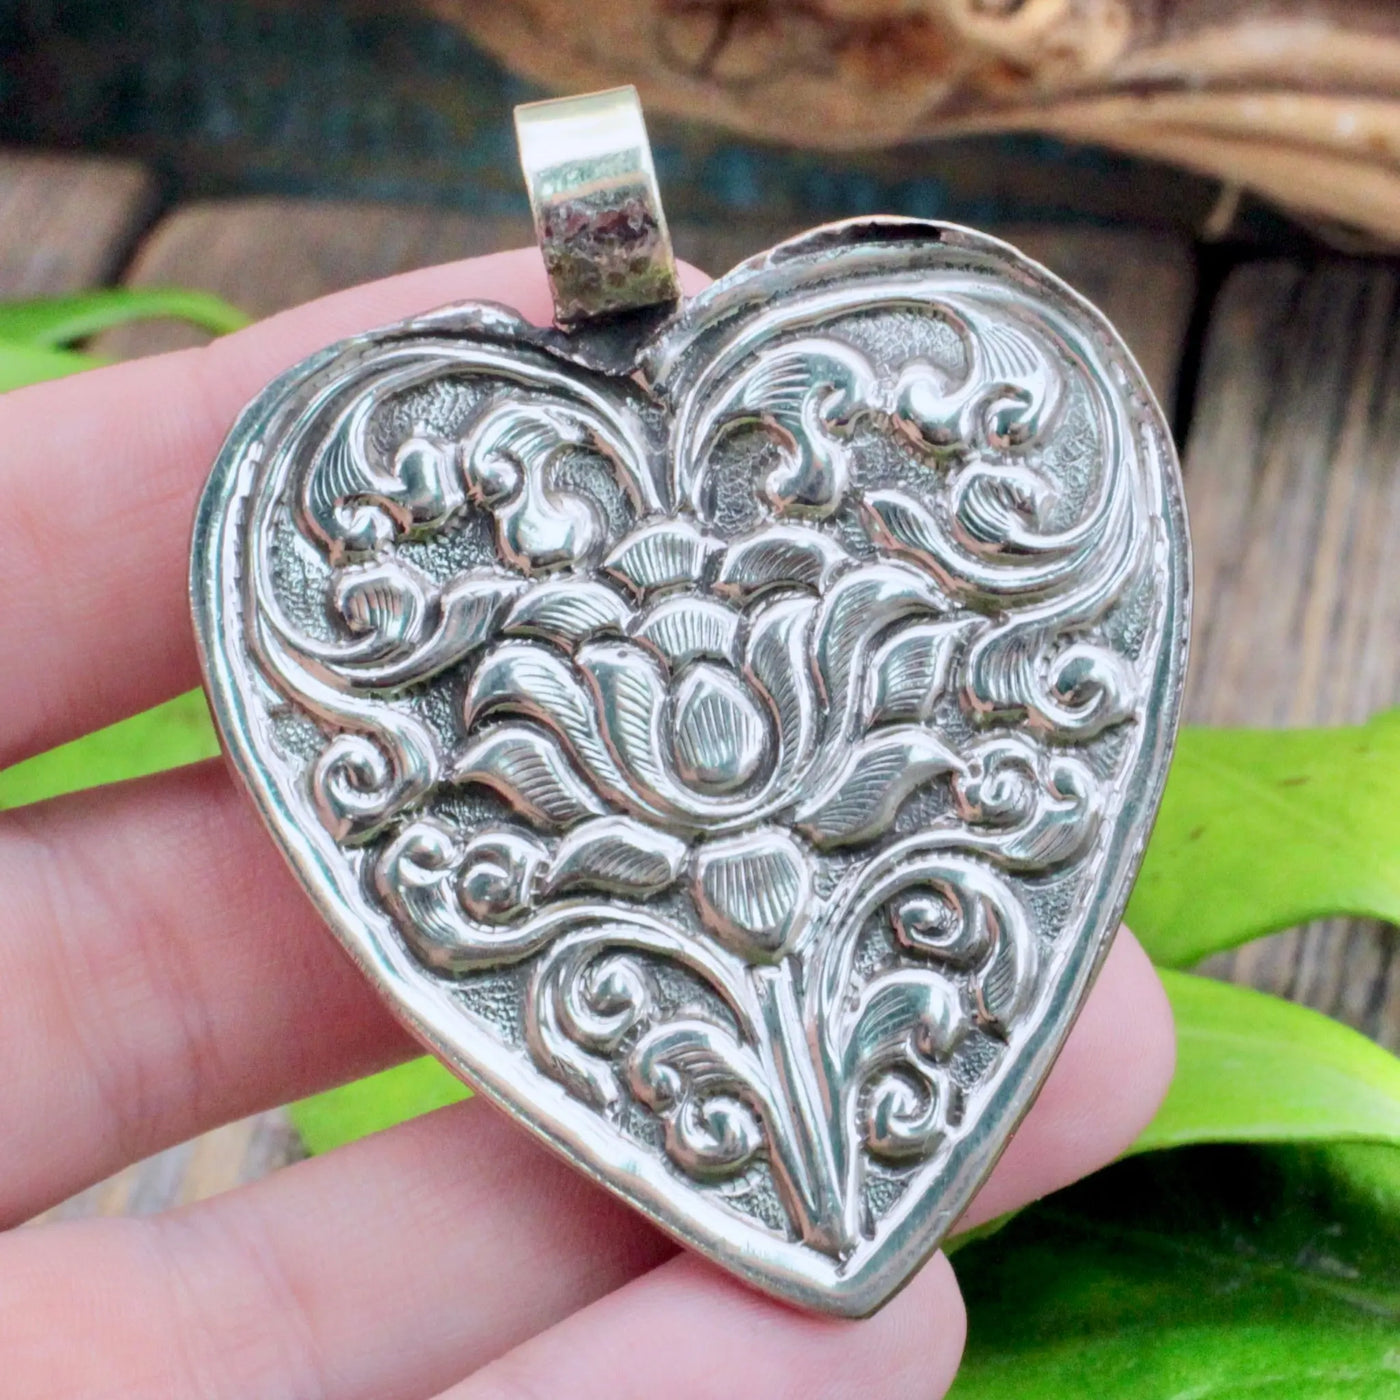 Mother of Pearl Heart with Evil Eye Pendant